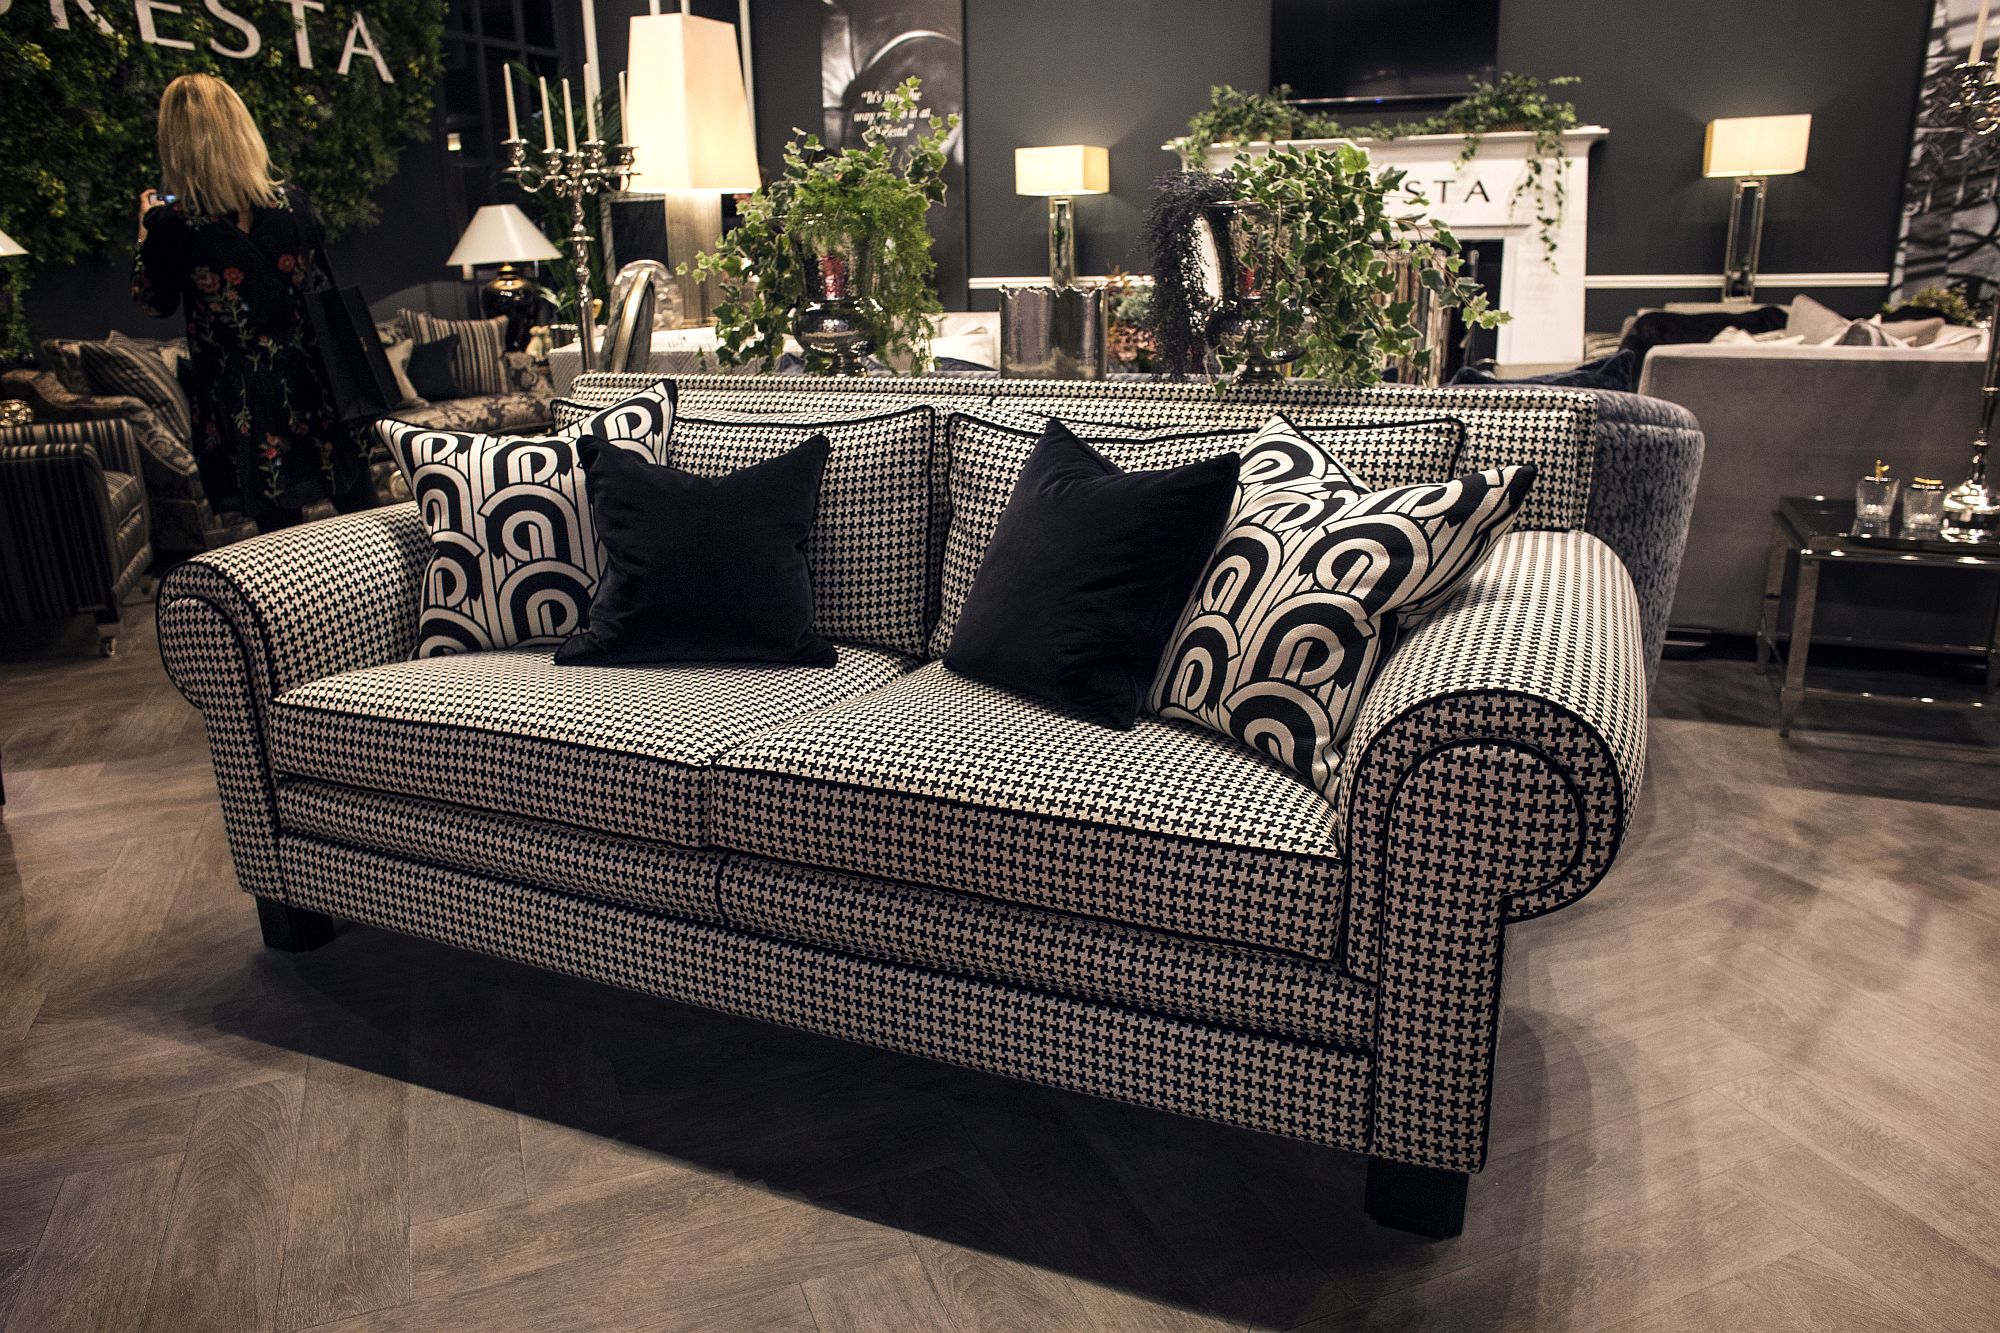 Ping Smart Modern Sofas In Black, Black And White Sofa Images